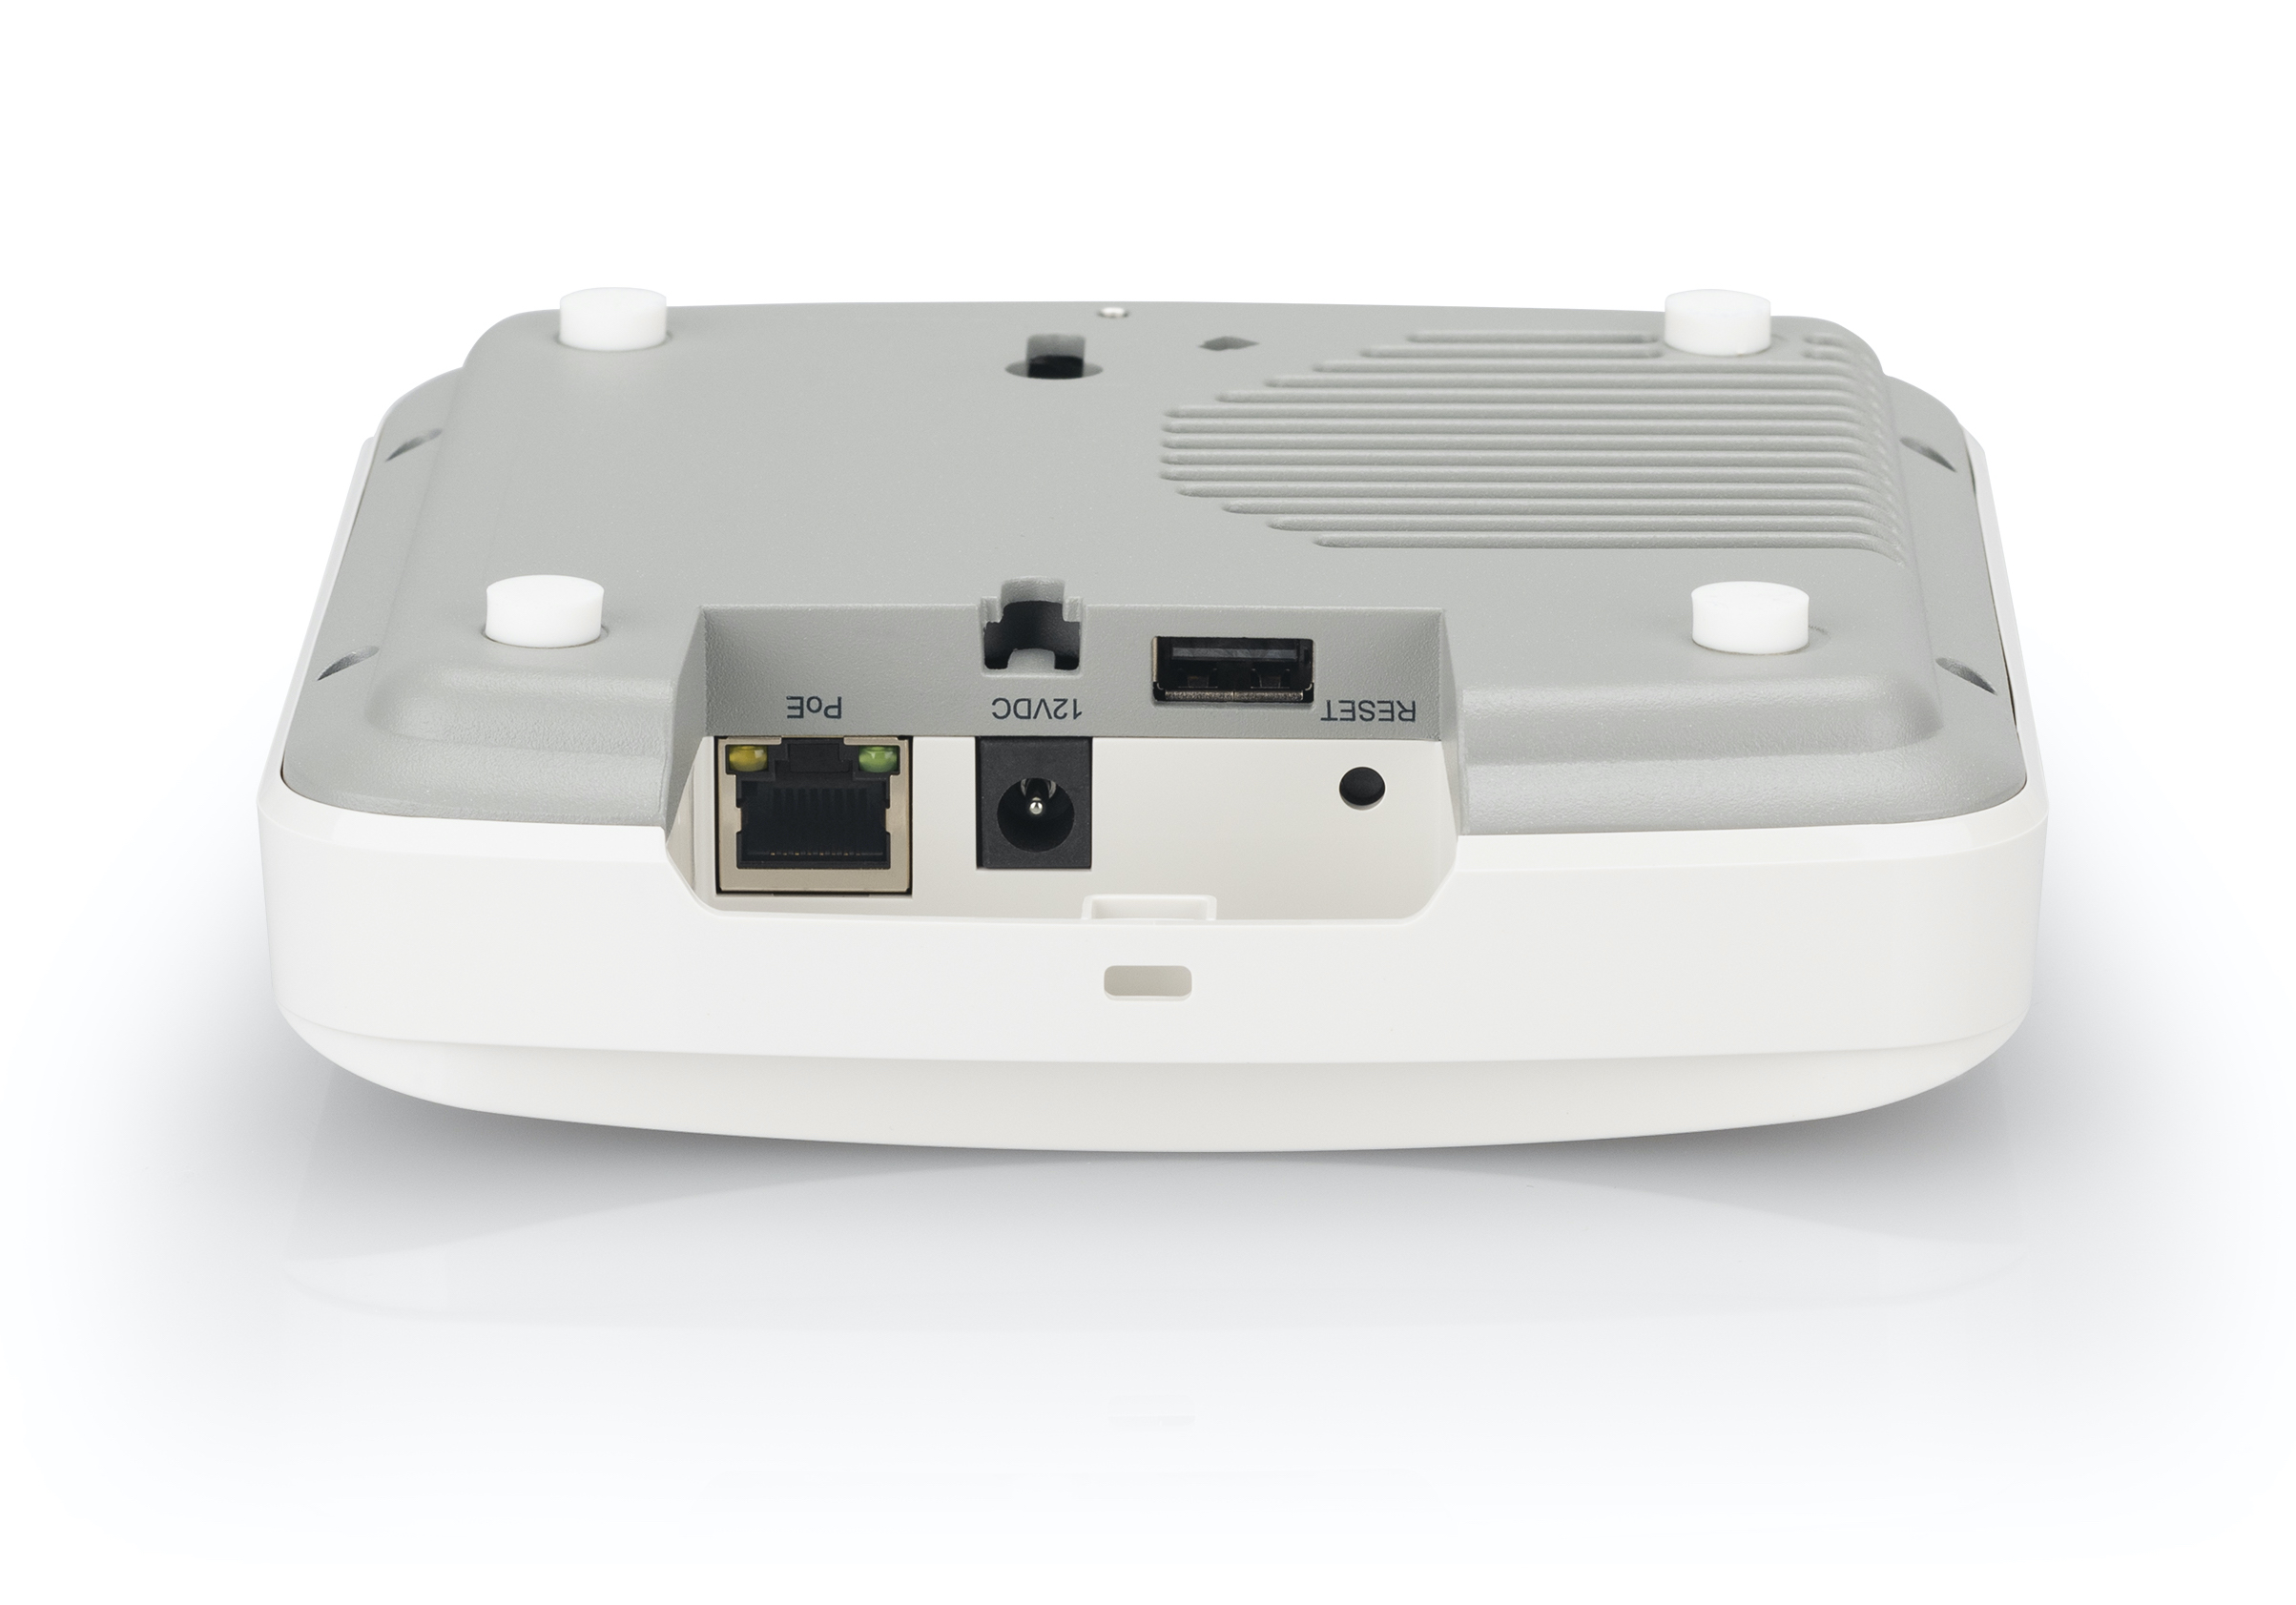 Ruckus R350 Indoor Access Point - Unleashed